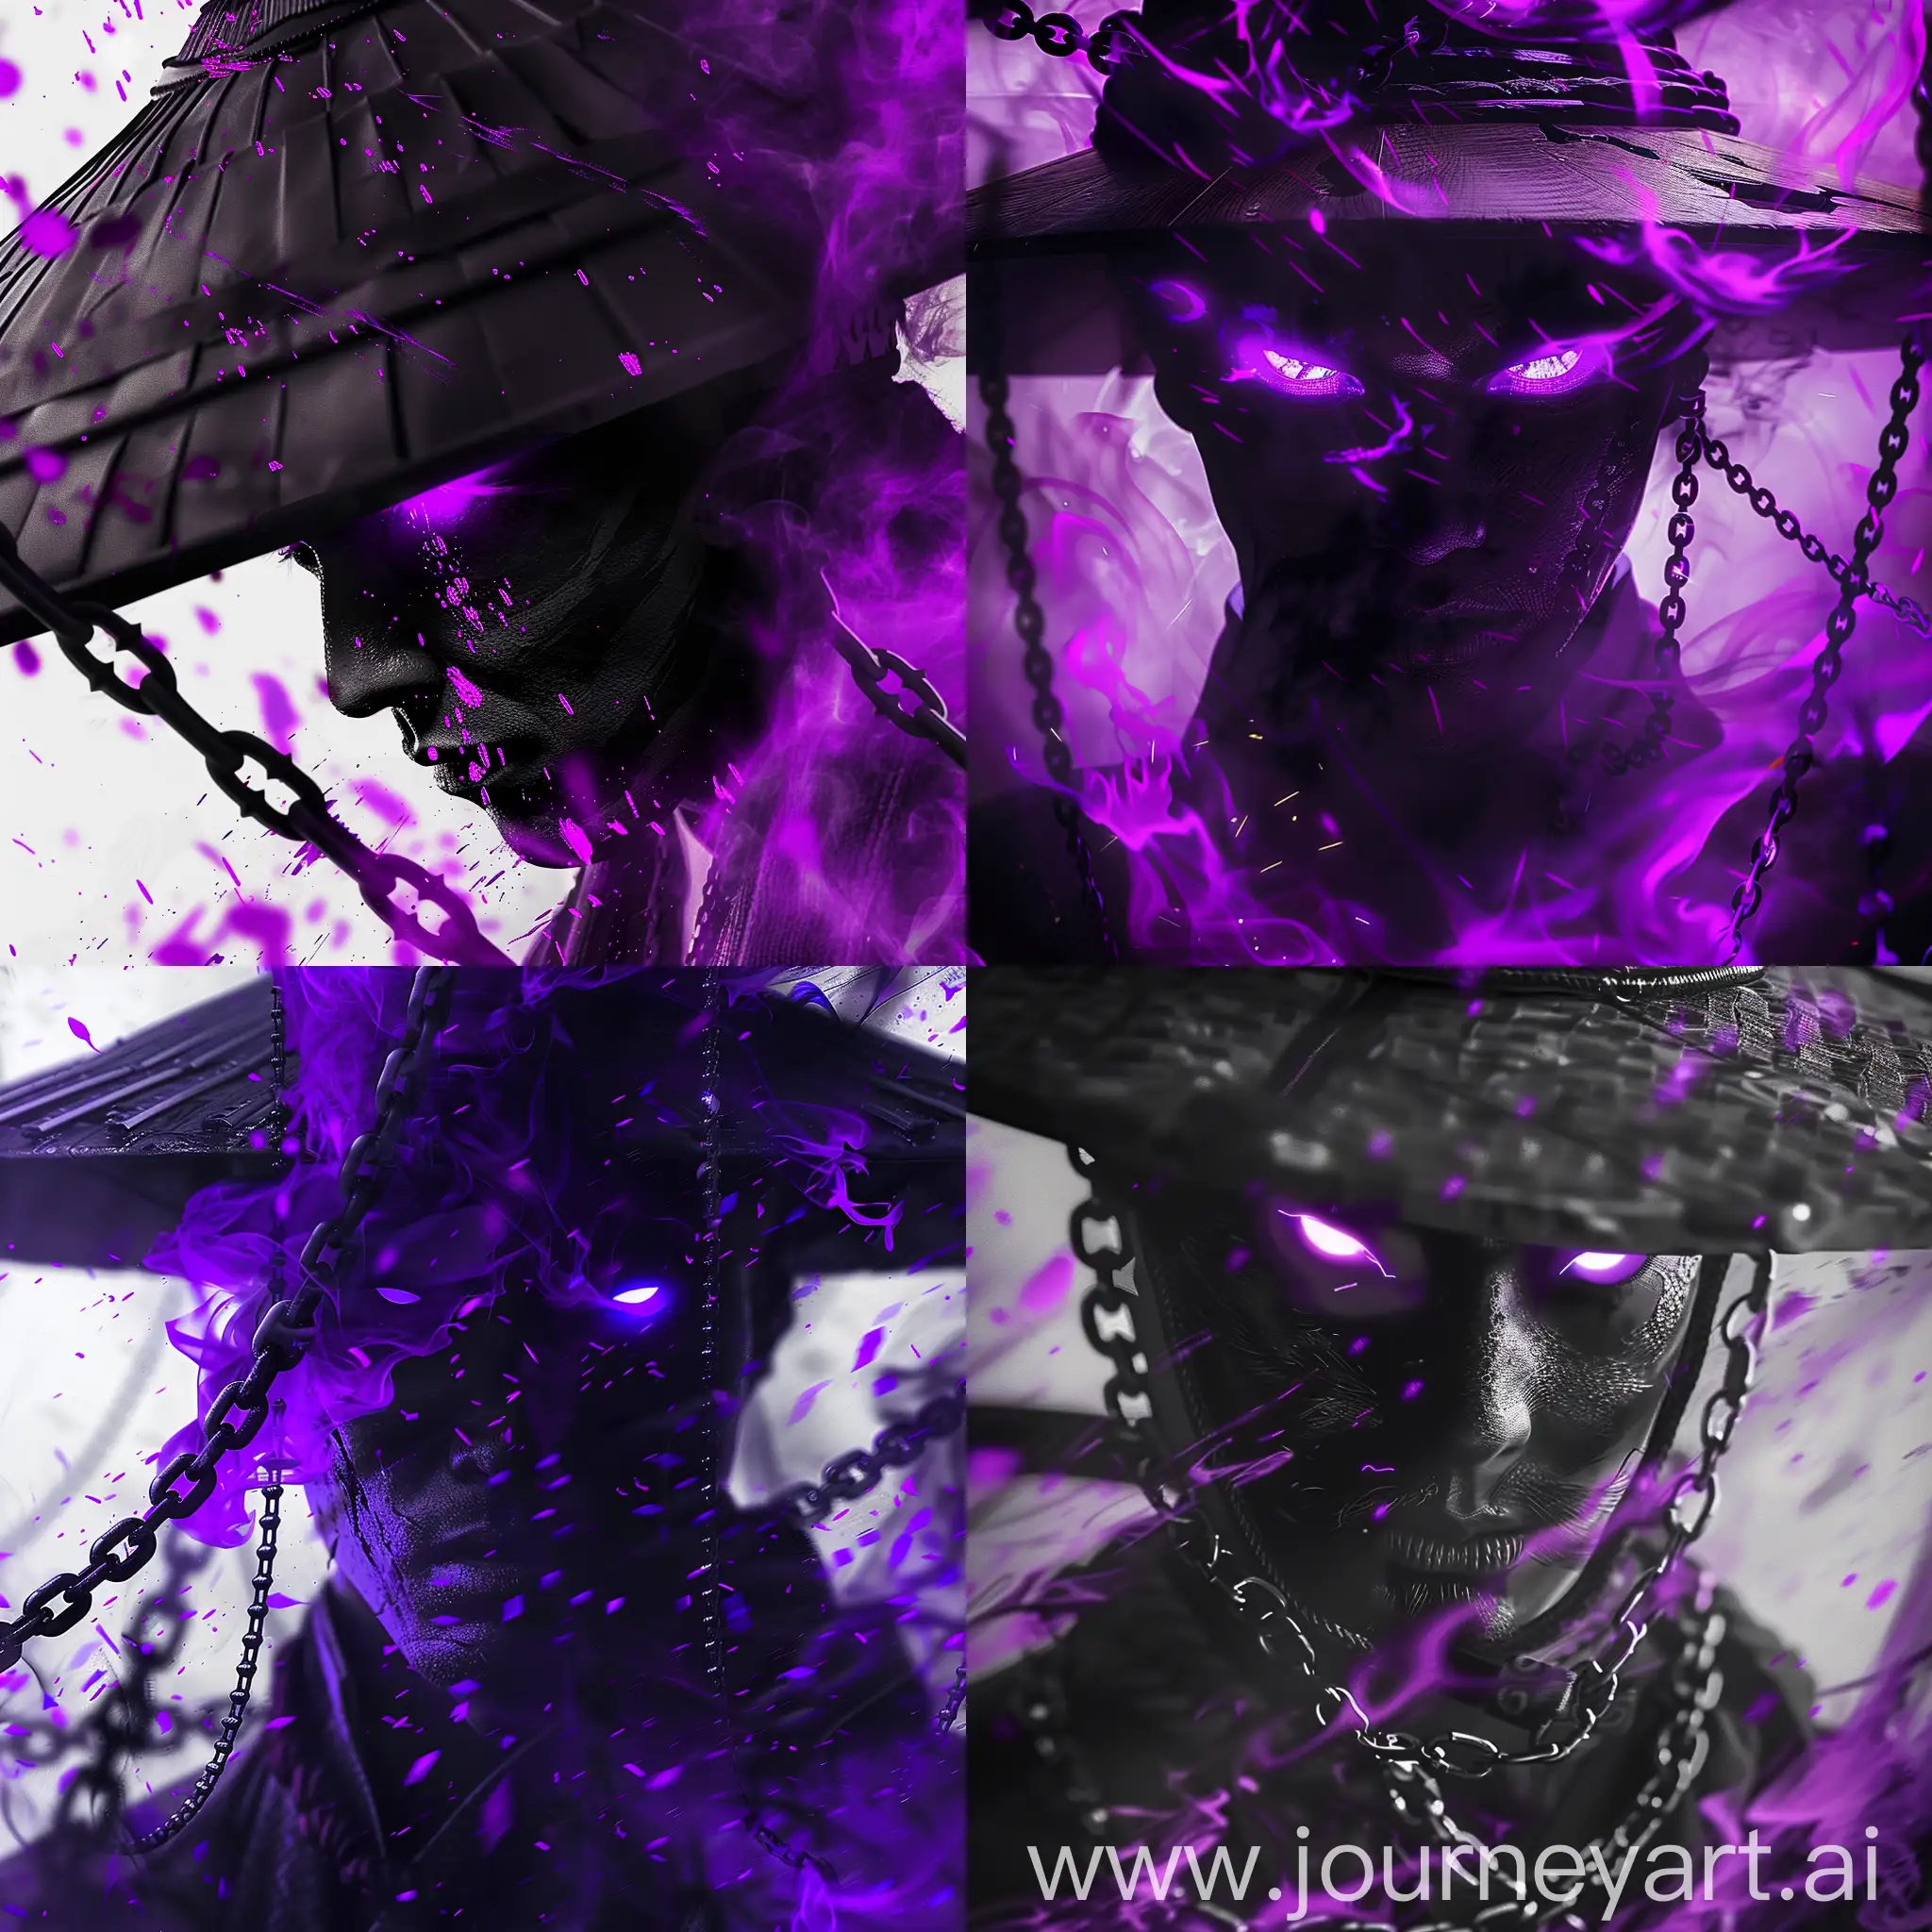 Mysterious-Shadow-Samurai-with-Glowing-Purple-Eyes-and-Flying-Chains